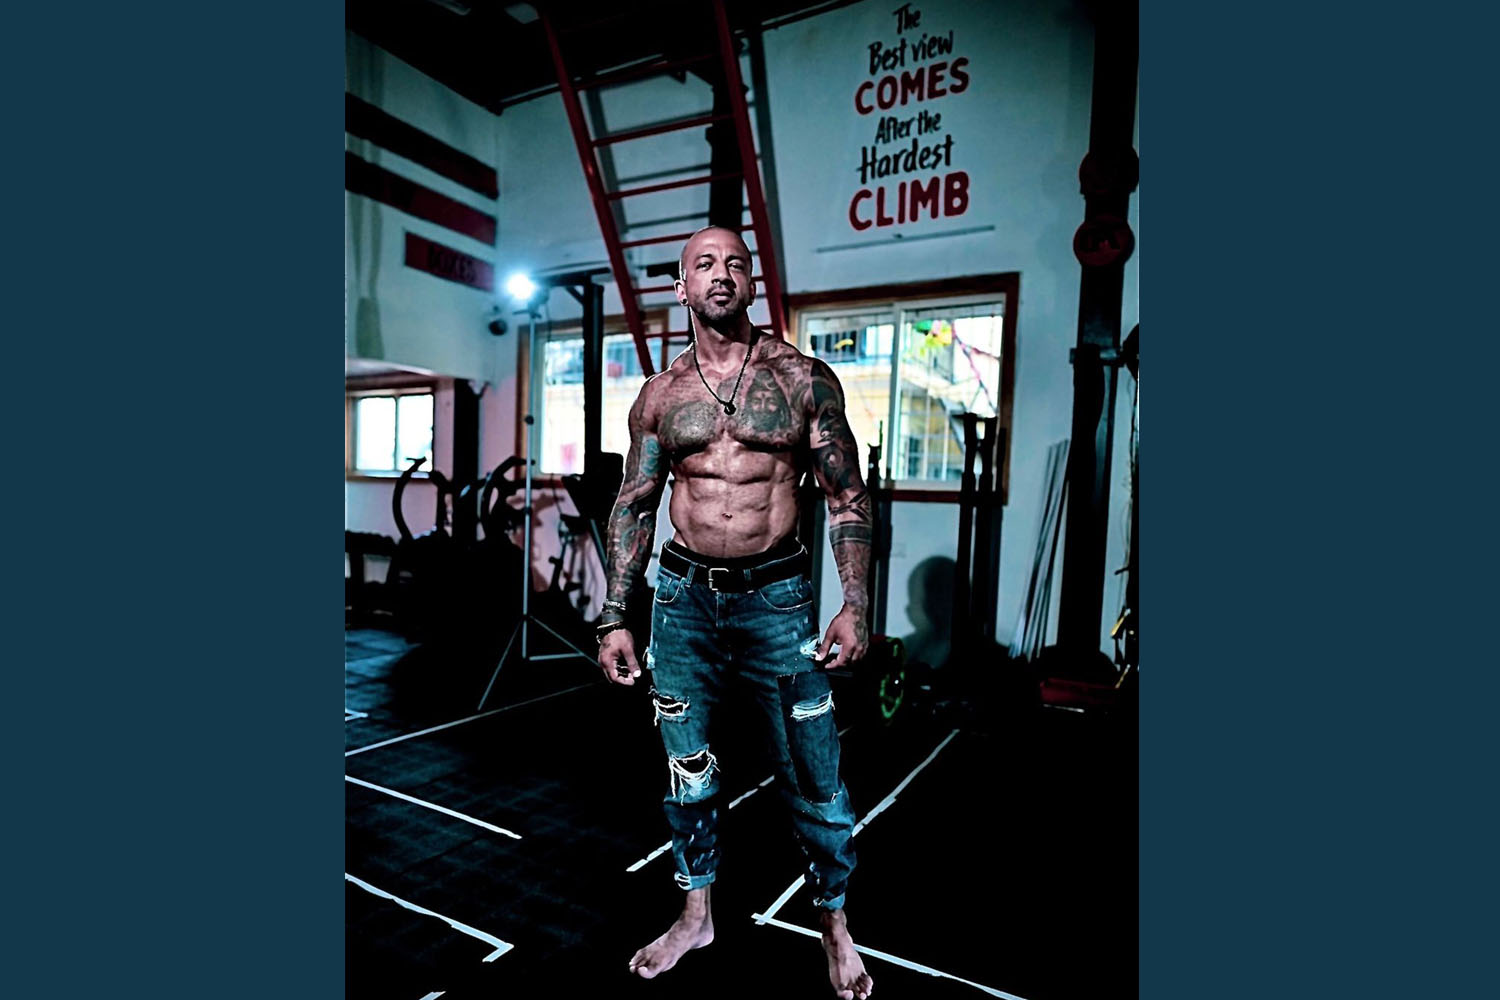 Shivohaam is a Celebrity fitness coach specializing in Crossfit and strength and conditioning transformations.